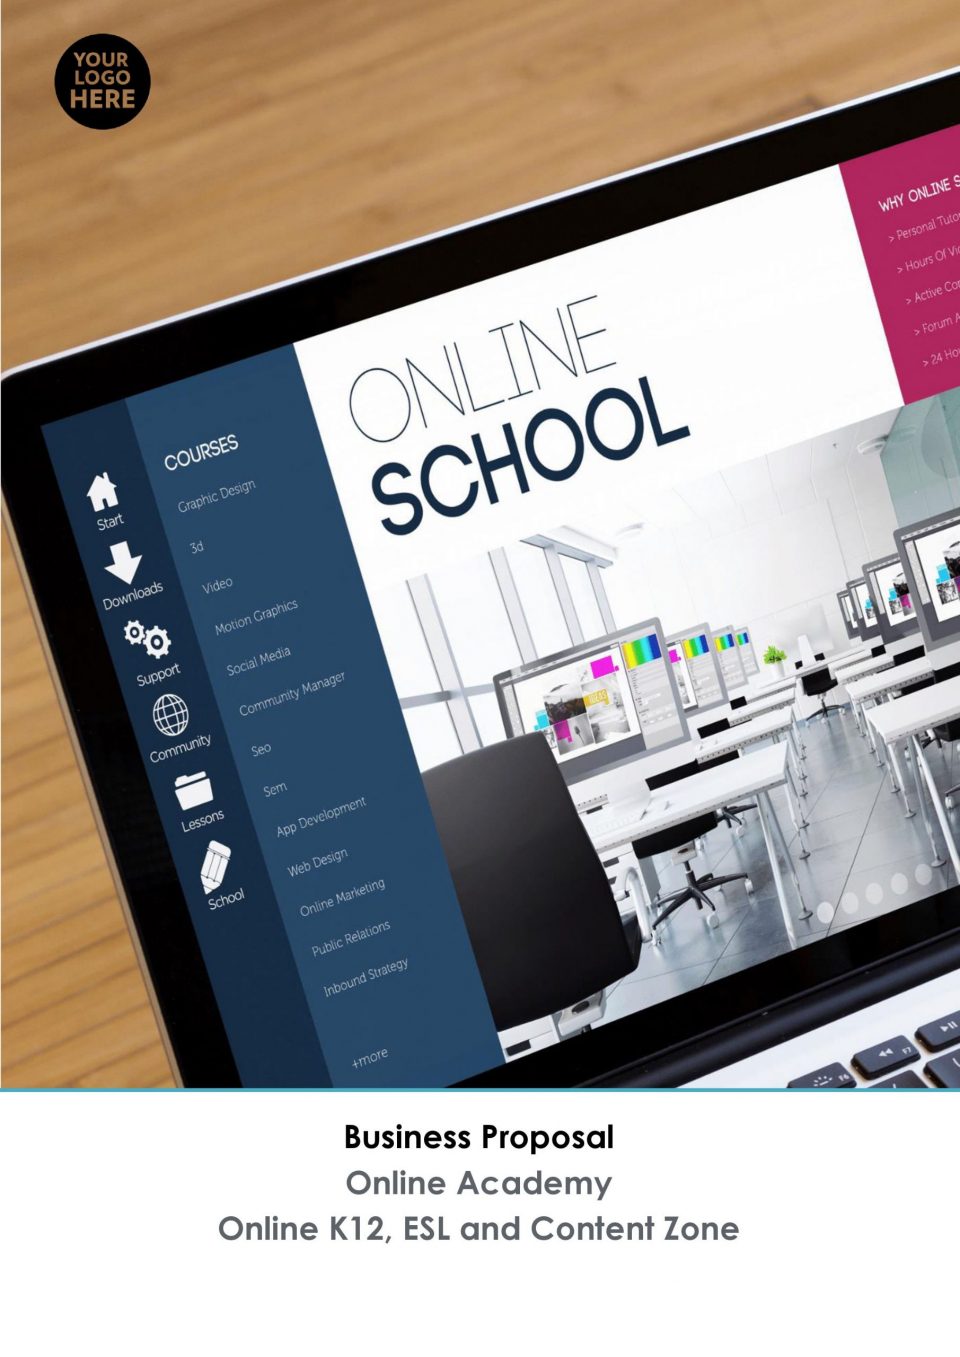 Business Proposal Online Academy Online K12 ESL and Content Zone 01 scaled